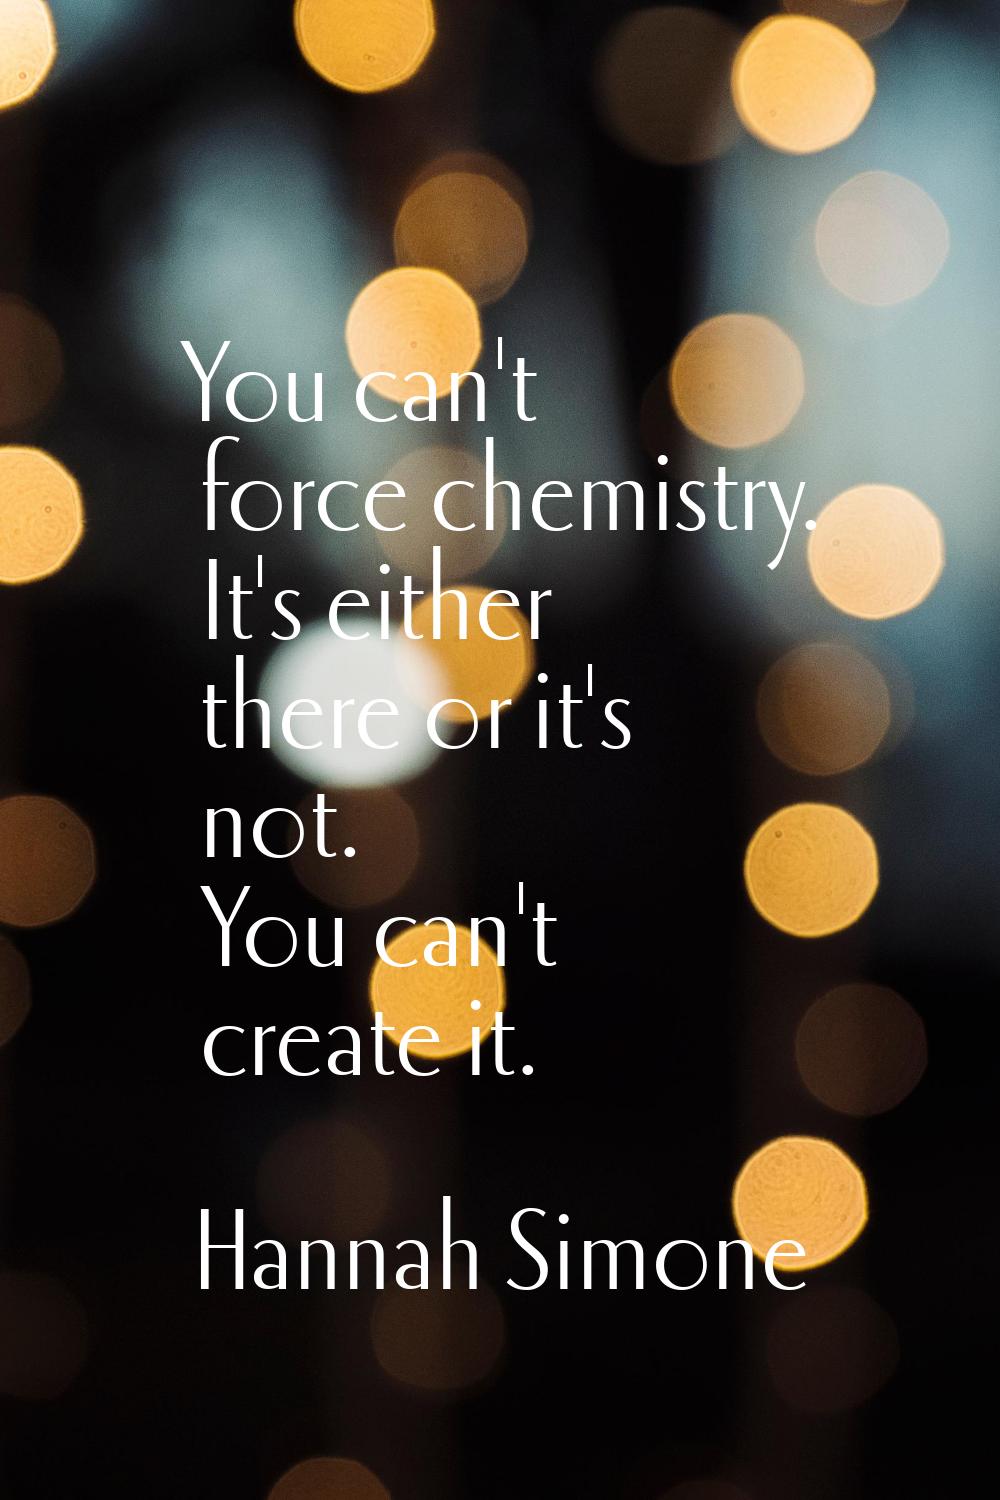 You can't force chemistry. It's either there or it's not. You can't create it.